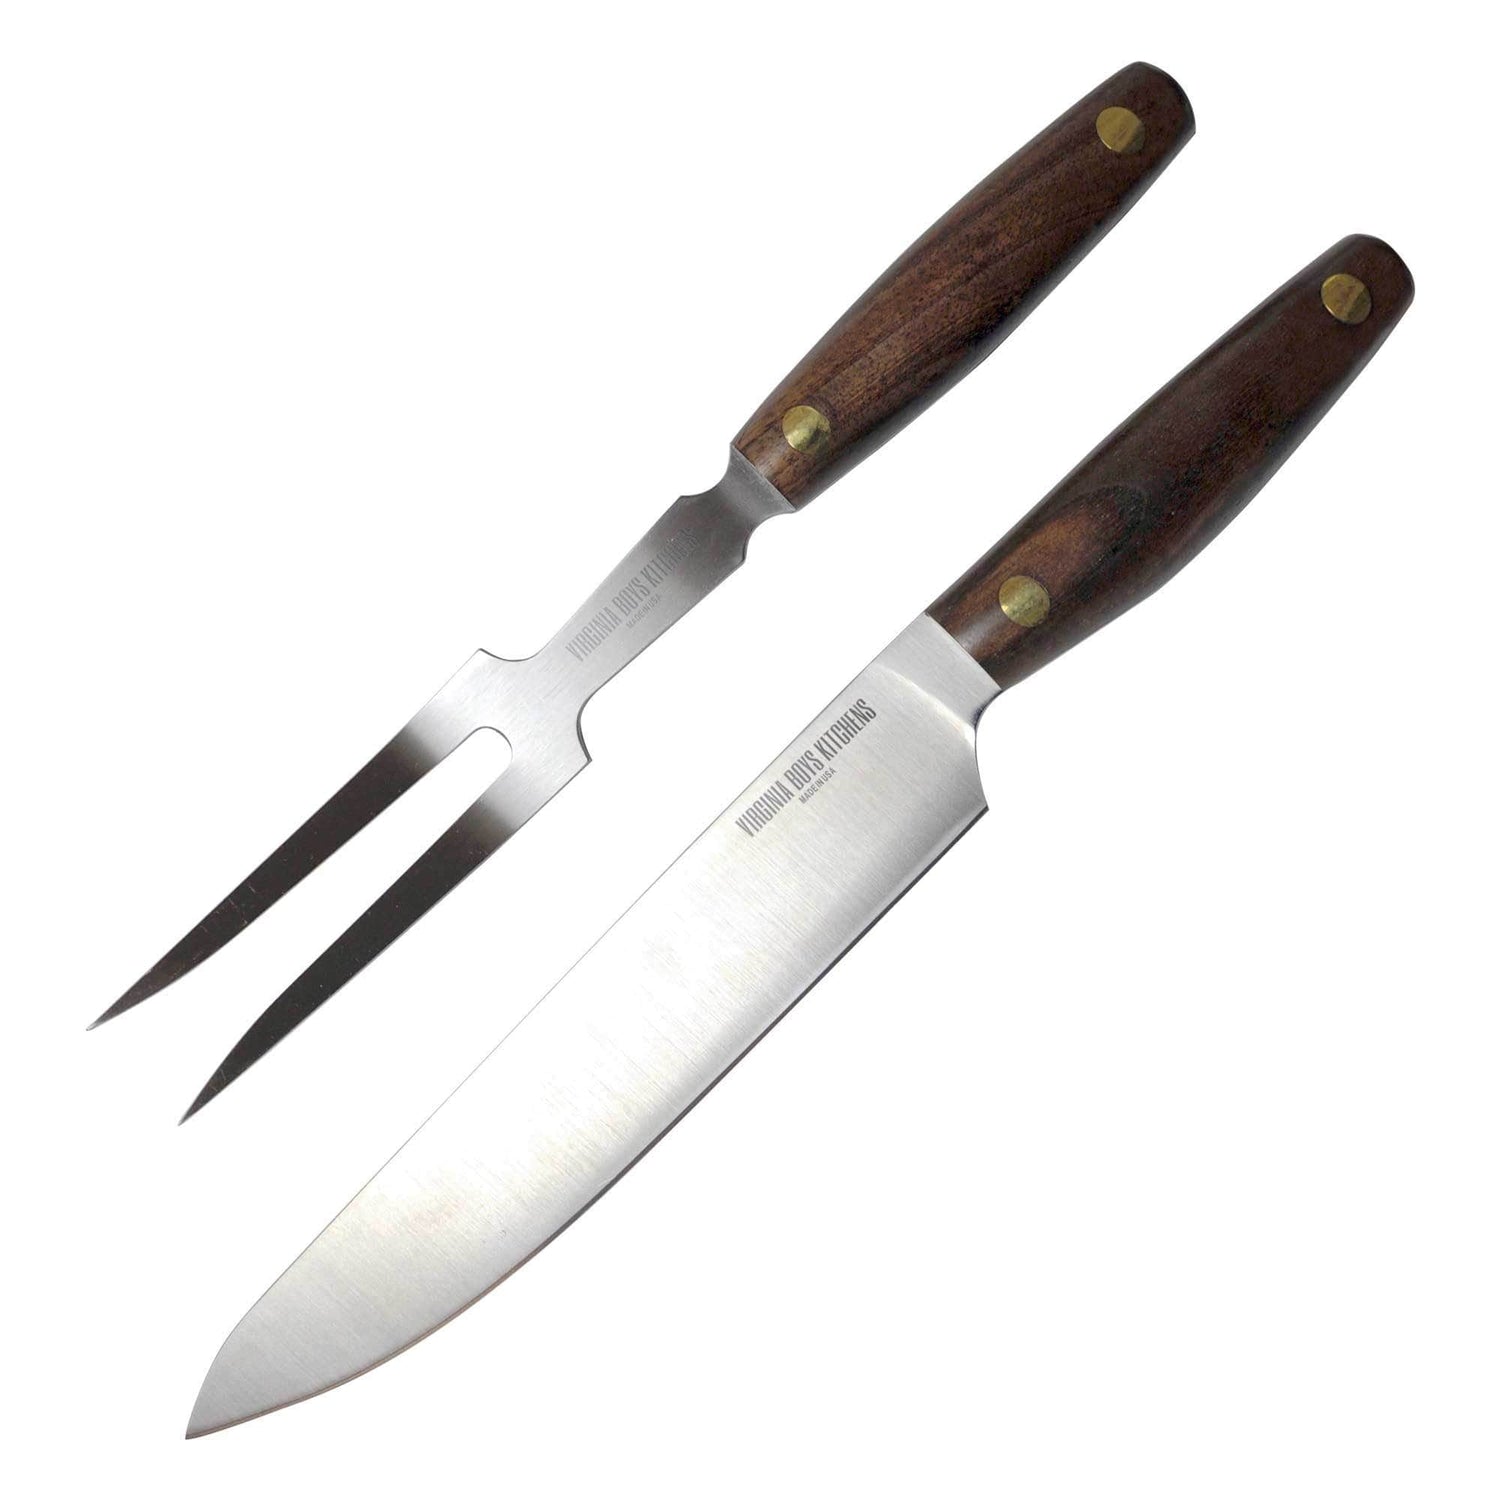 2 Piece Stainless Steel Carving Set with Walnut Wood Handles